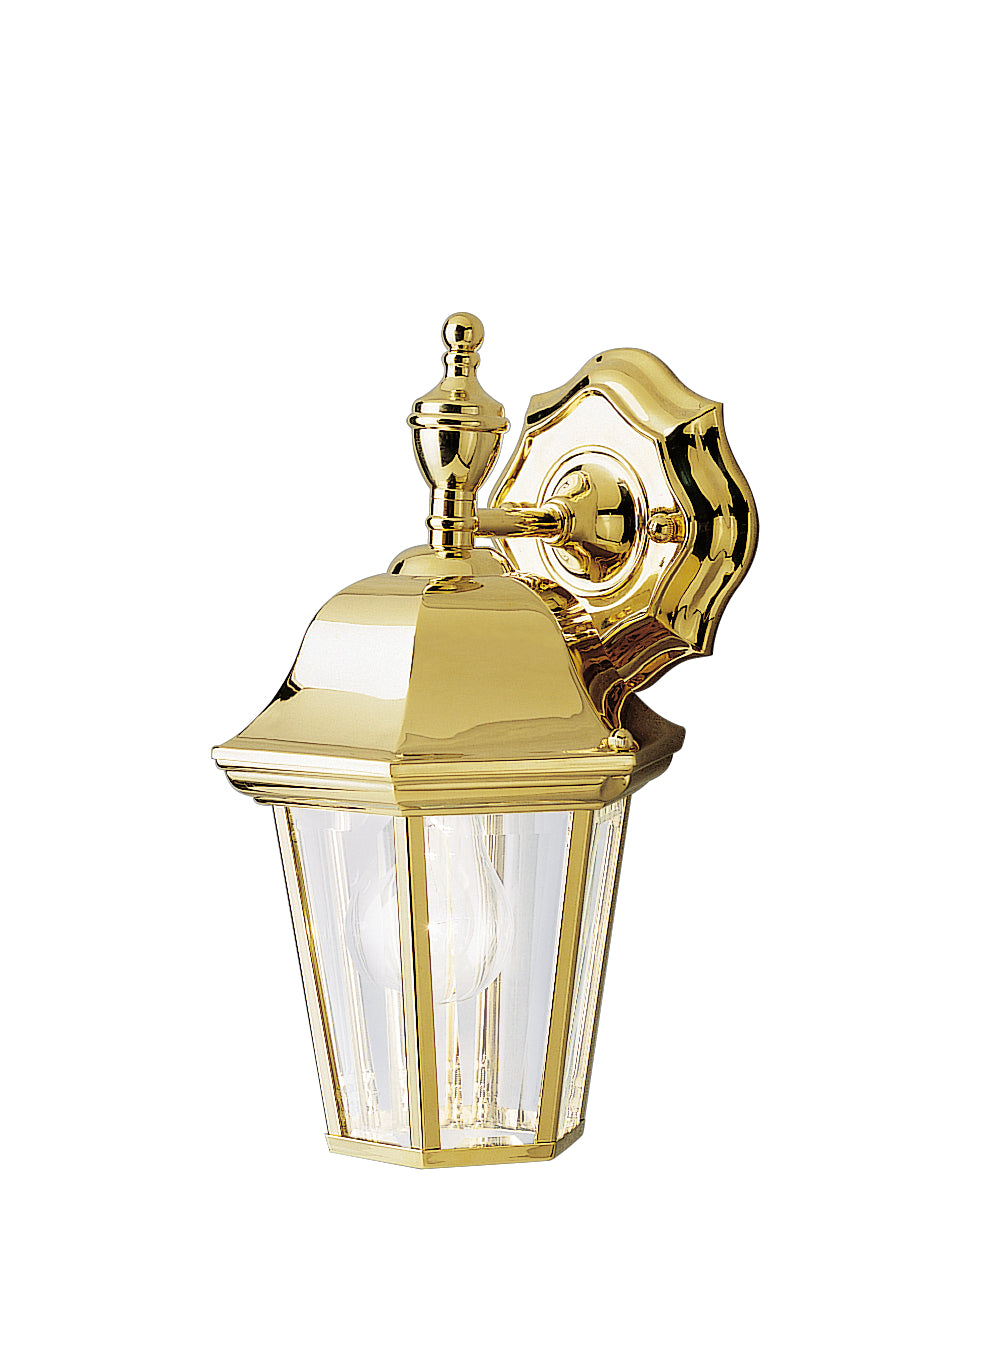 GROVE MILL Outdoor sconce Gold - 9409PB | KICHLER